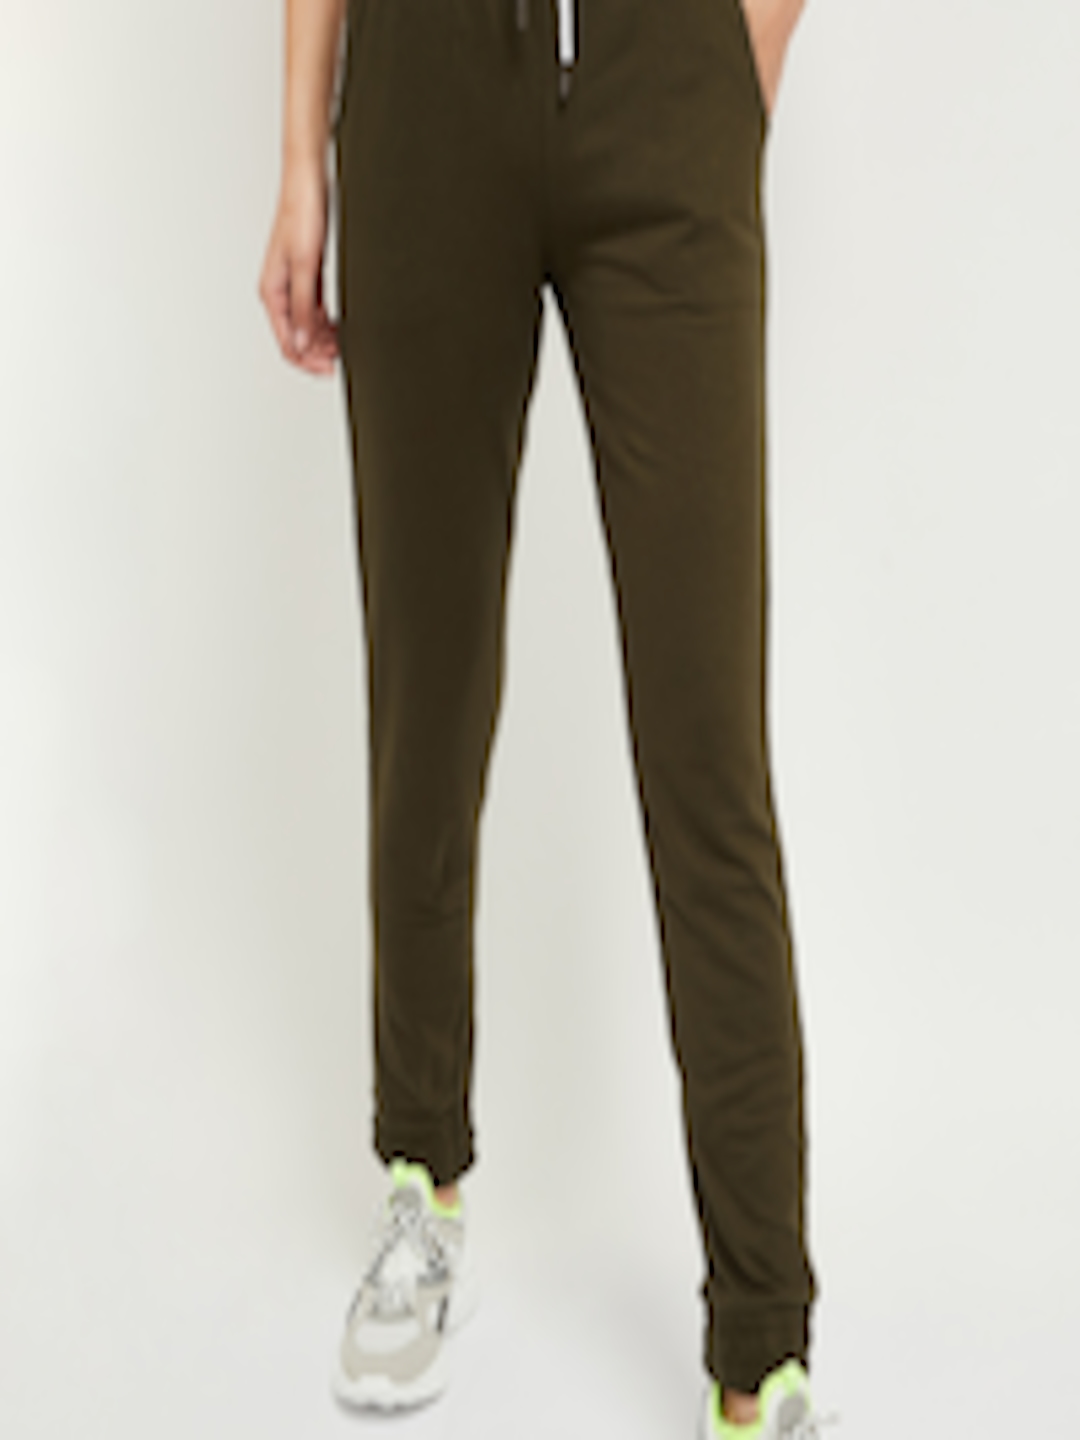 Buy Max Women Olive Green Regular Fit Solid Joggers Trousers for